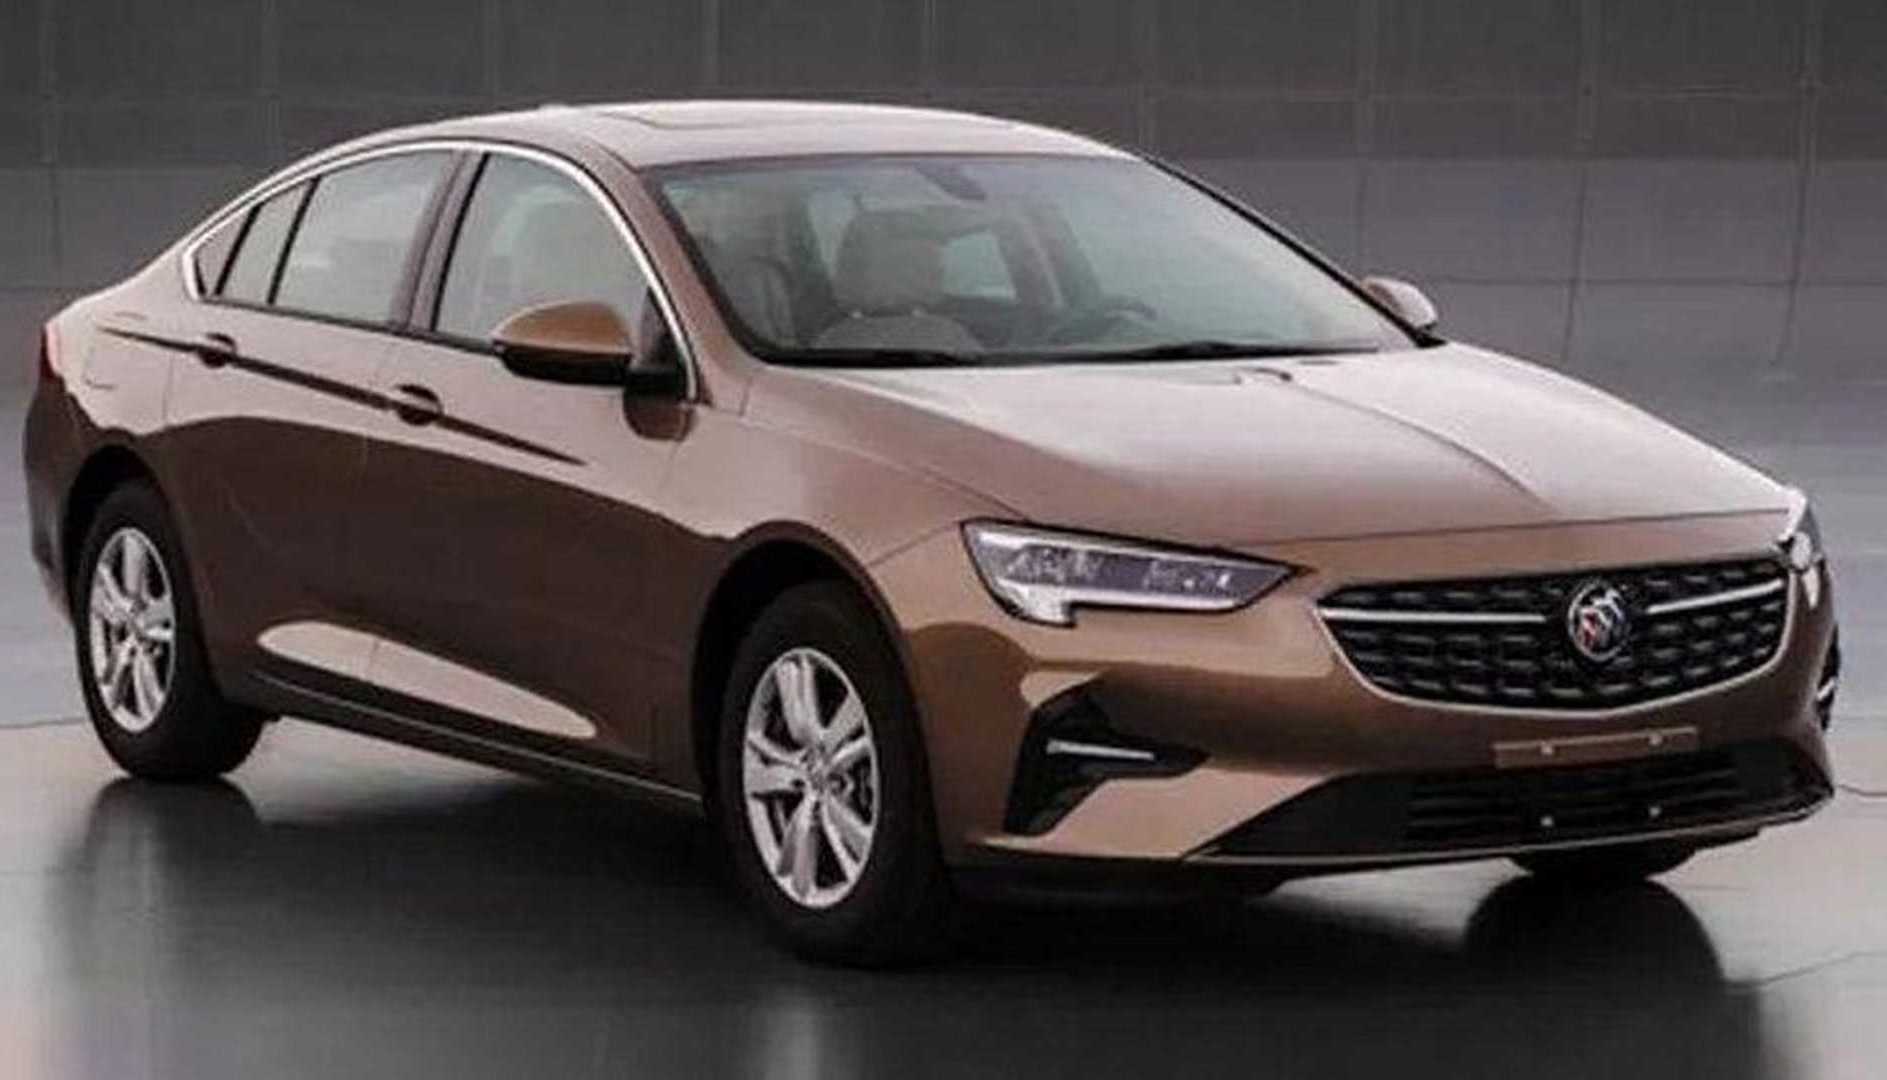 Buick Regal facelift surfaces, previews 2020 Holden Commodore